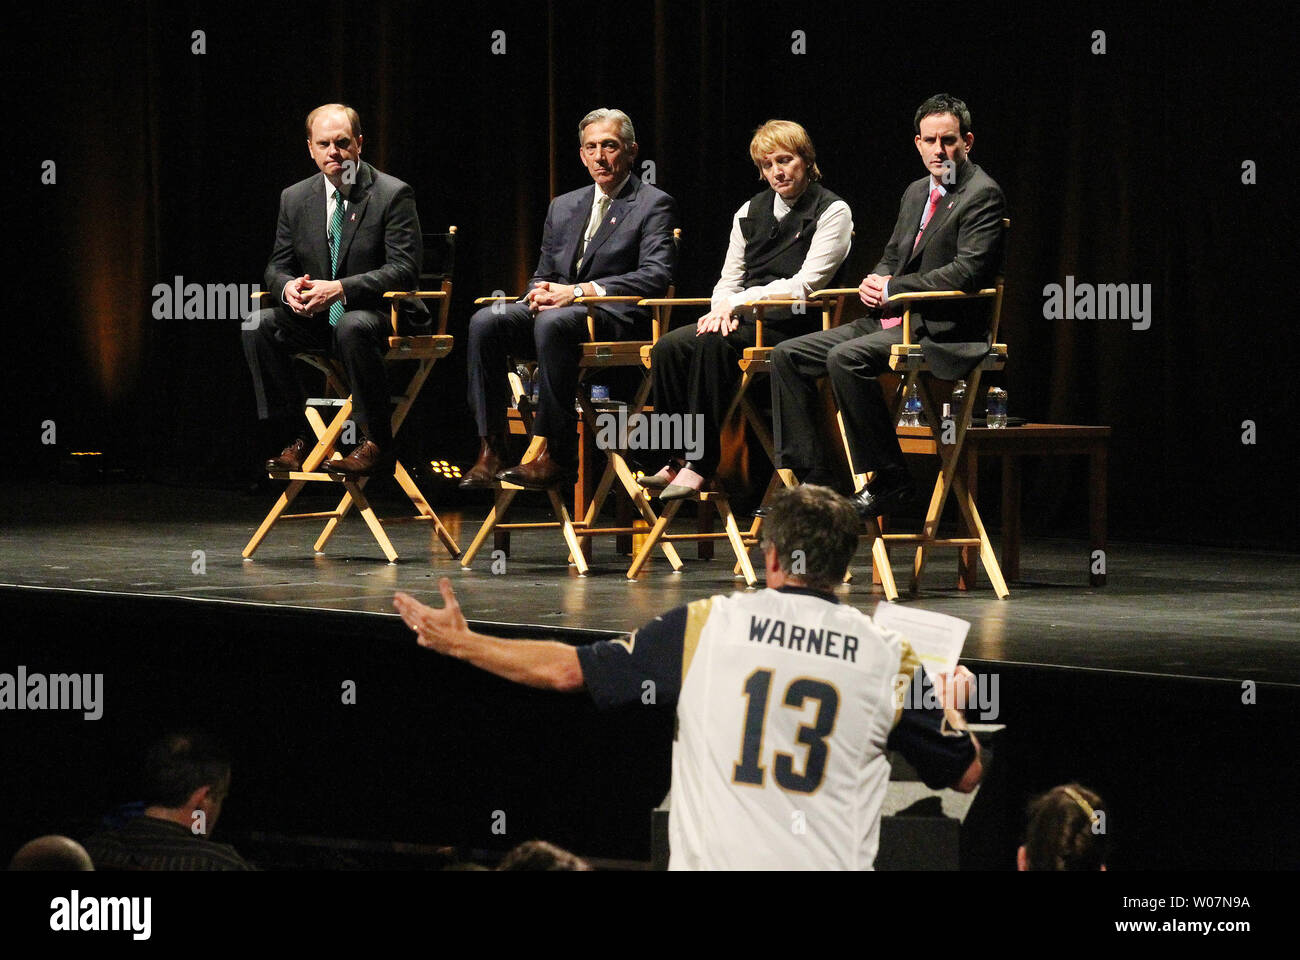 A St. Louis Rams fan wearing a Kurt Warner jersey makes his remarks in favor of the St. Louis Rams remaining in St. Louis during a town hall meeting at the Peabody Opera House in St. Louis on October 27, 2015. Representing the National Football League are (L to R) Chris Hardart, Eric Grubman, Cynthia Hogan and.Jay Bauman. The Rams owner Stan Kronke has hinted that he wants to move the team to Los Angeles. Town hall meetings are also scheduled for Oakland and San Diego. Photo by Bill Greenblatt/UPI Stock Photo